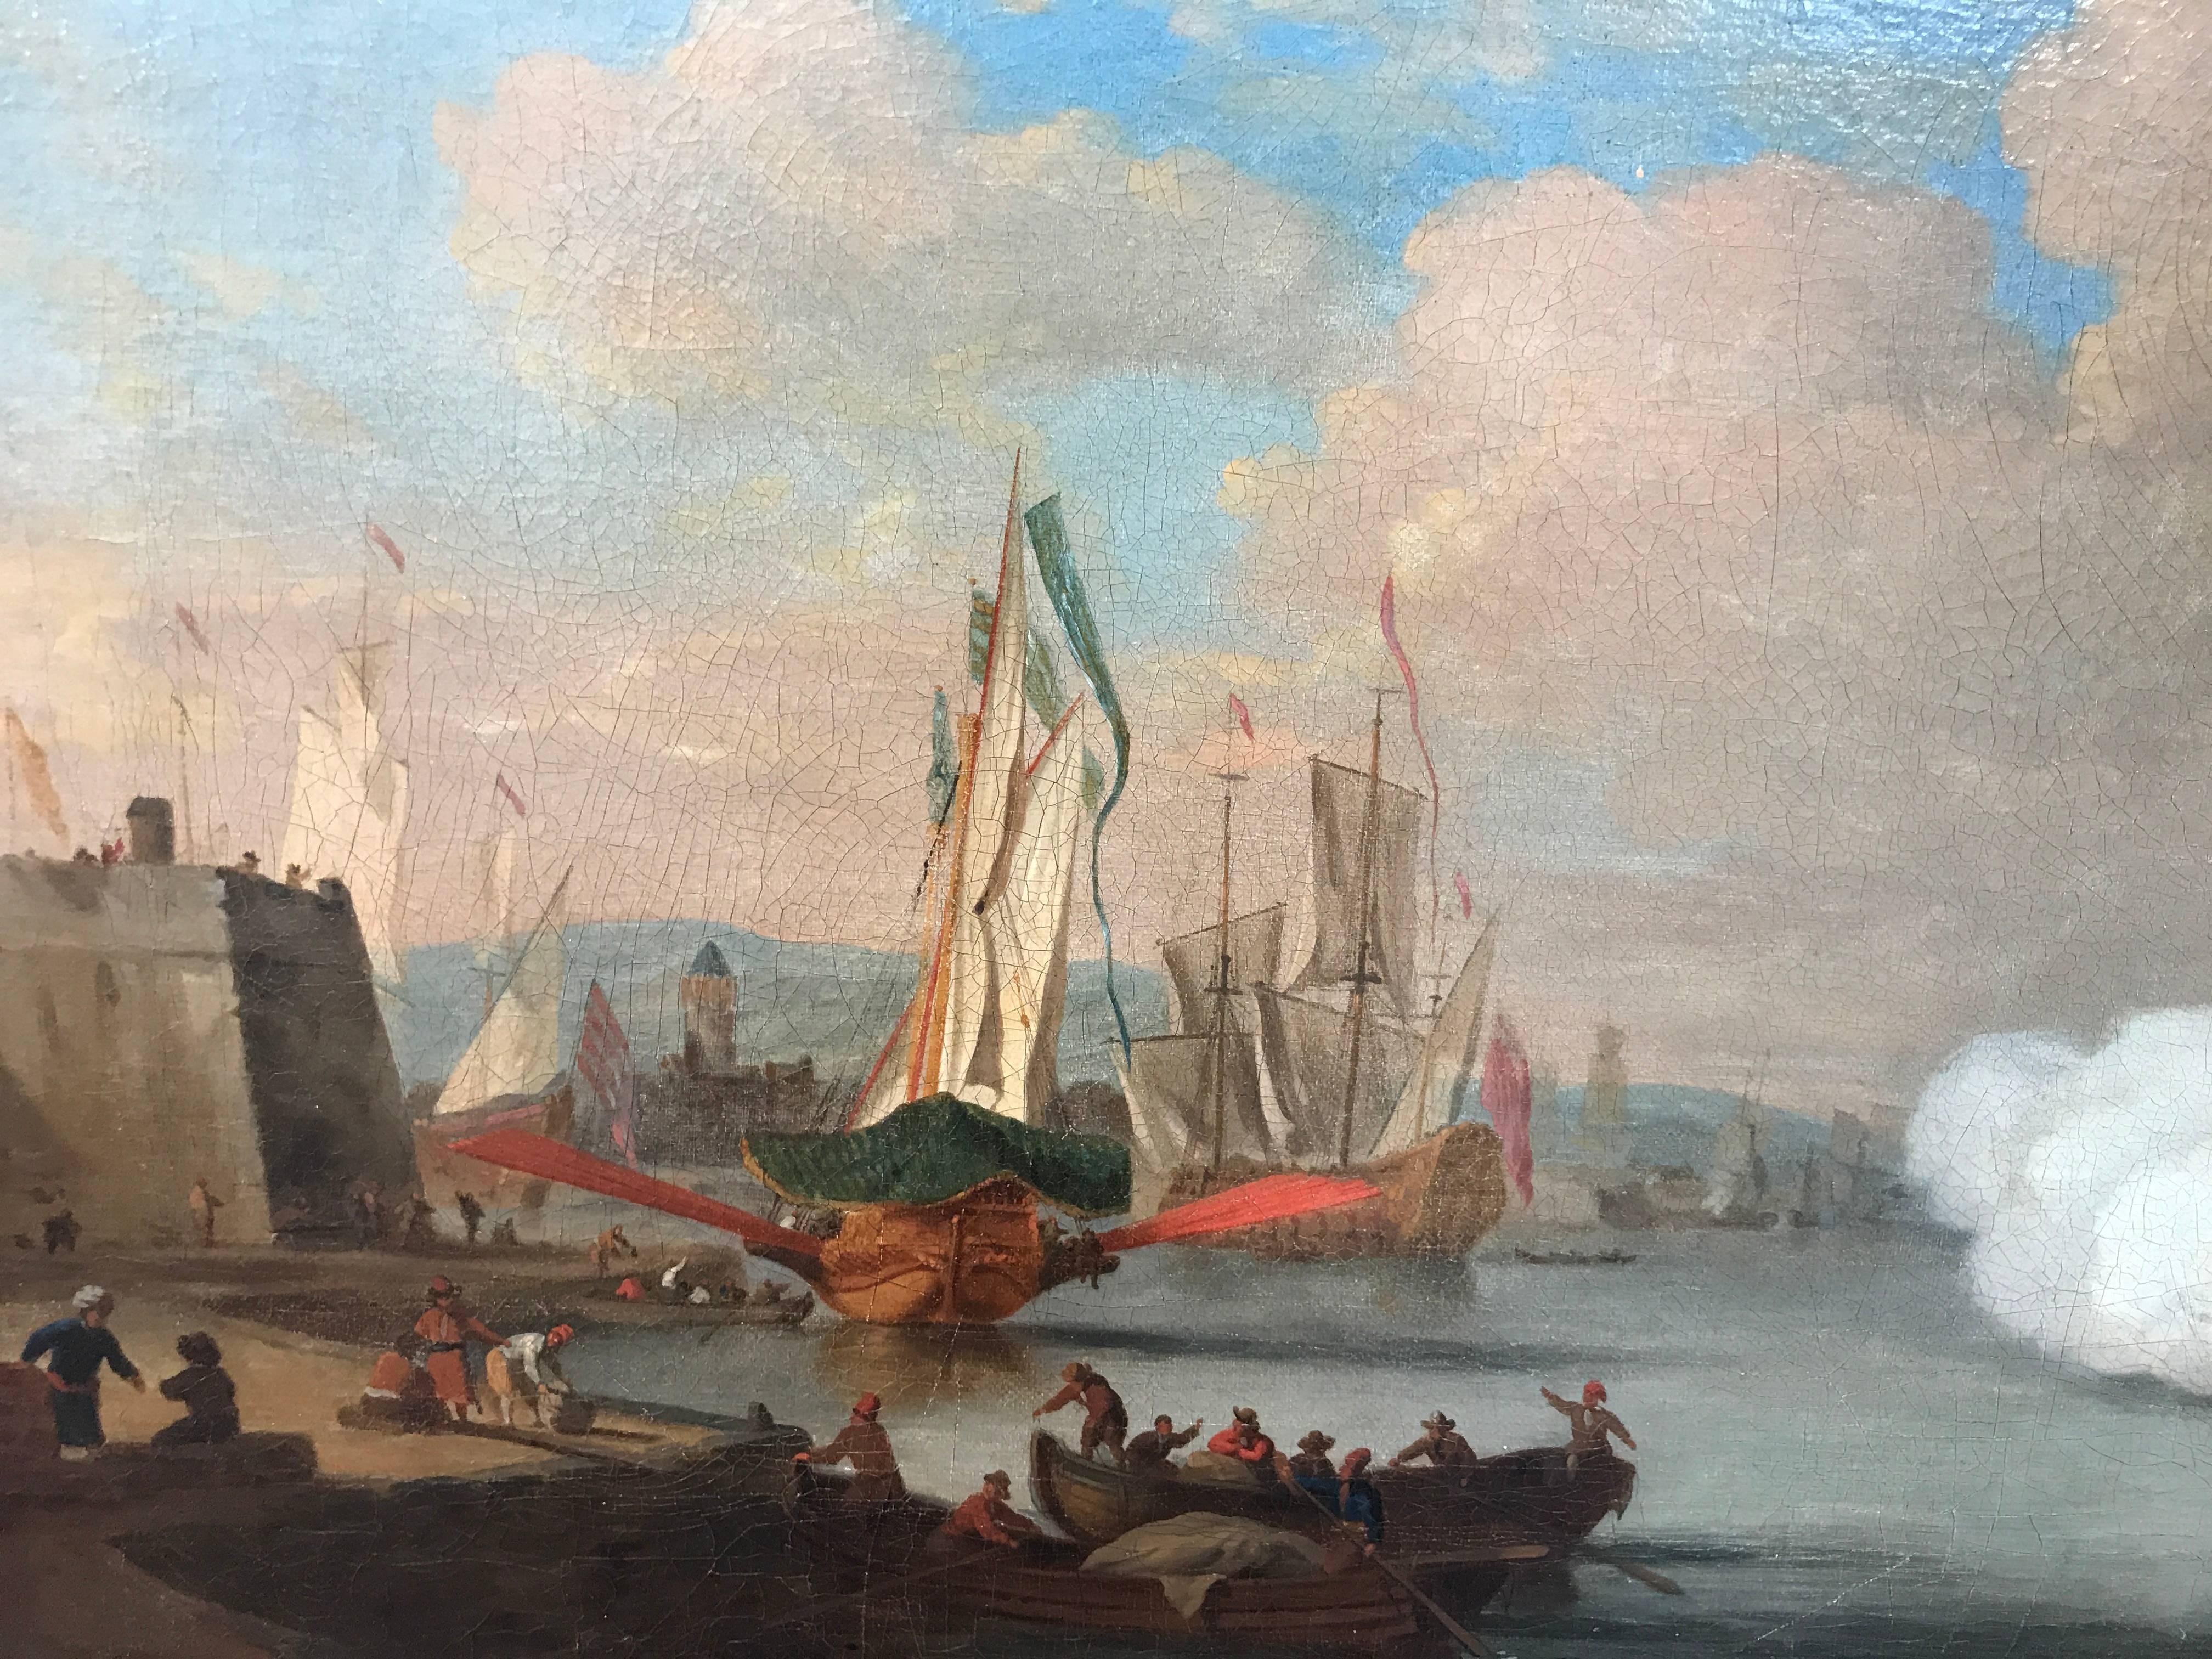  A Levantine or Southern European Harbor Attributed to Van de Velde the Younger 4